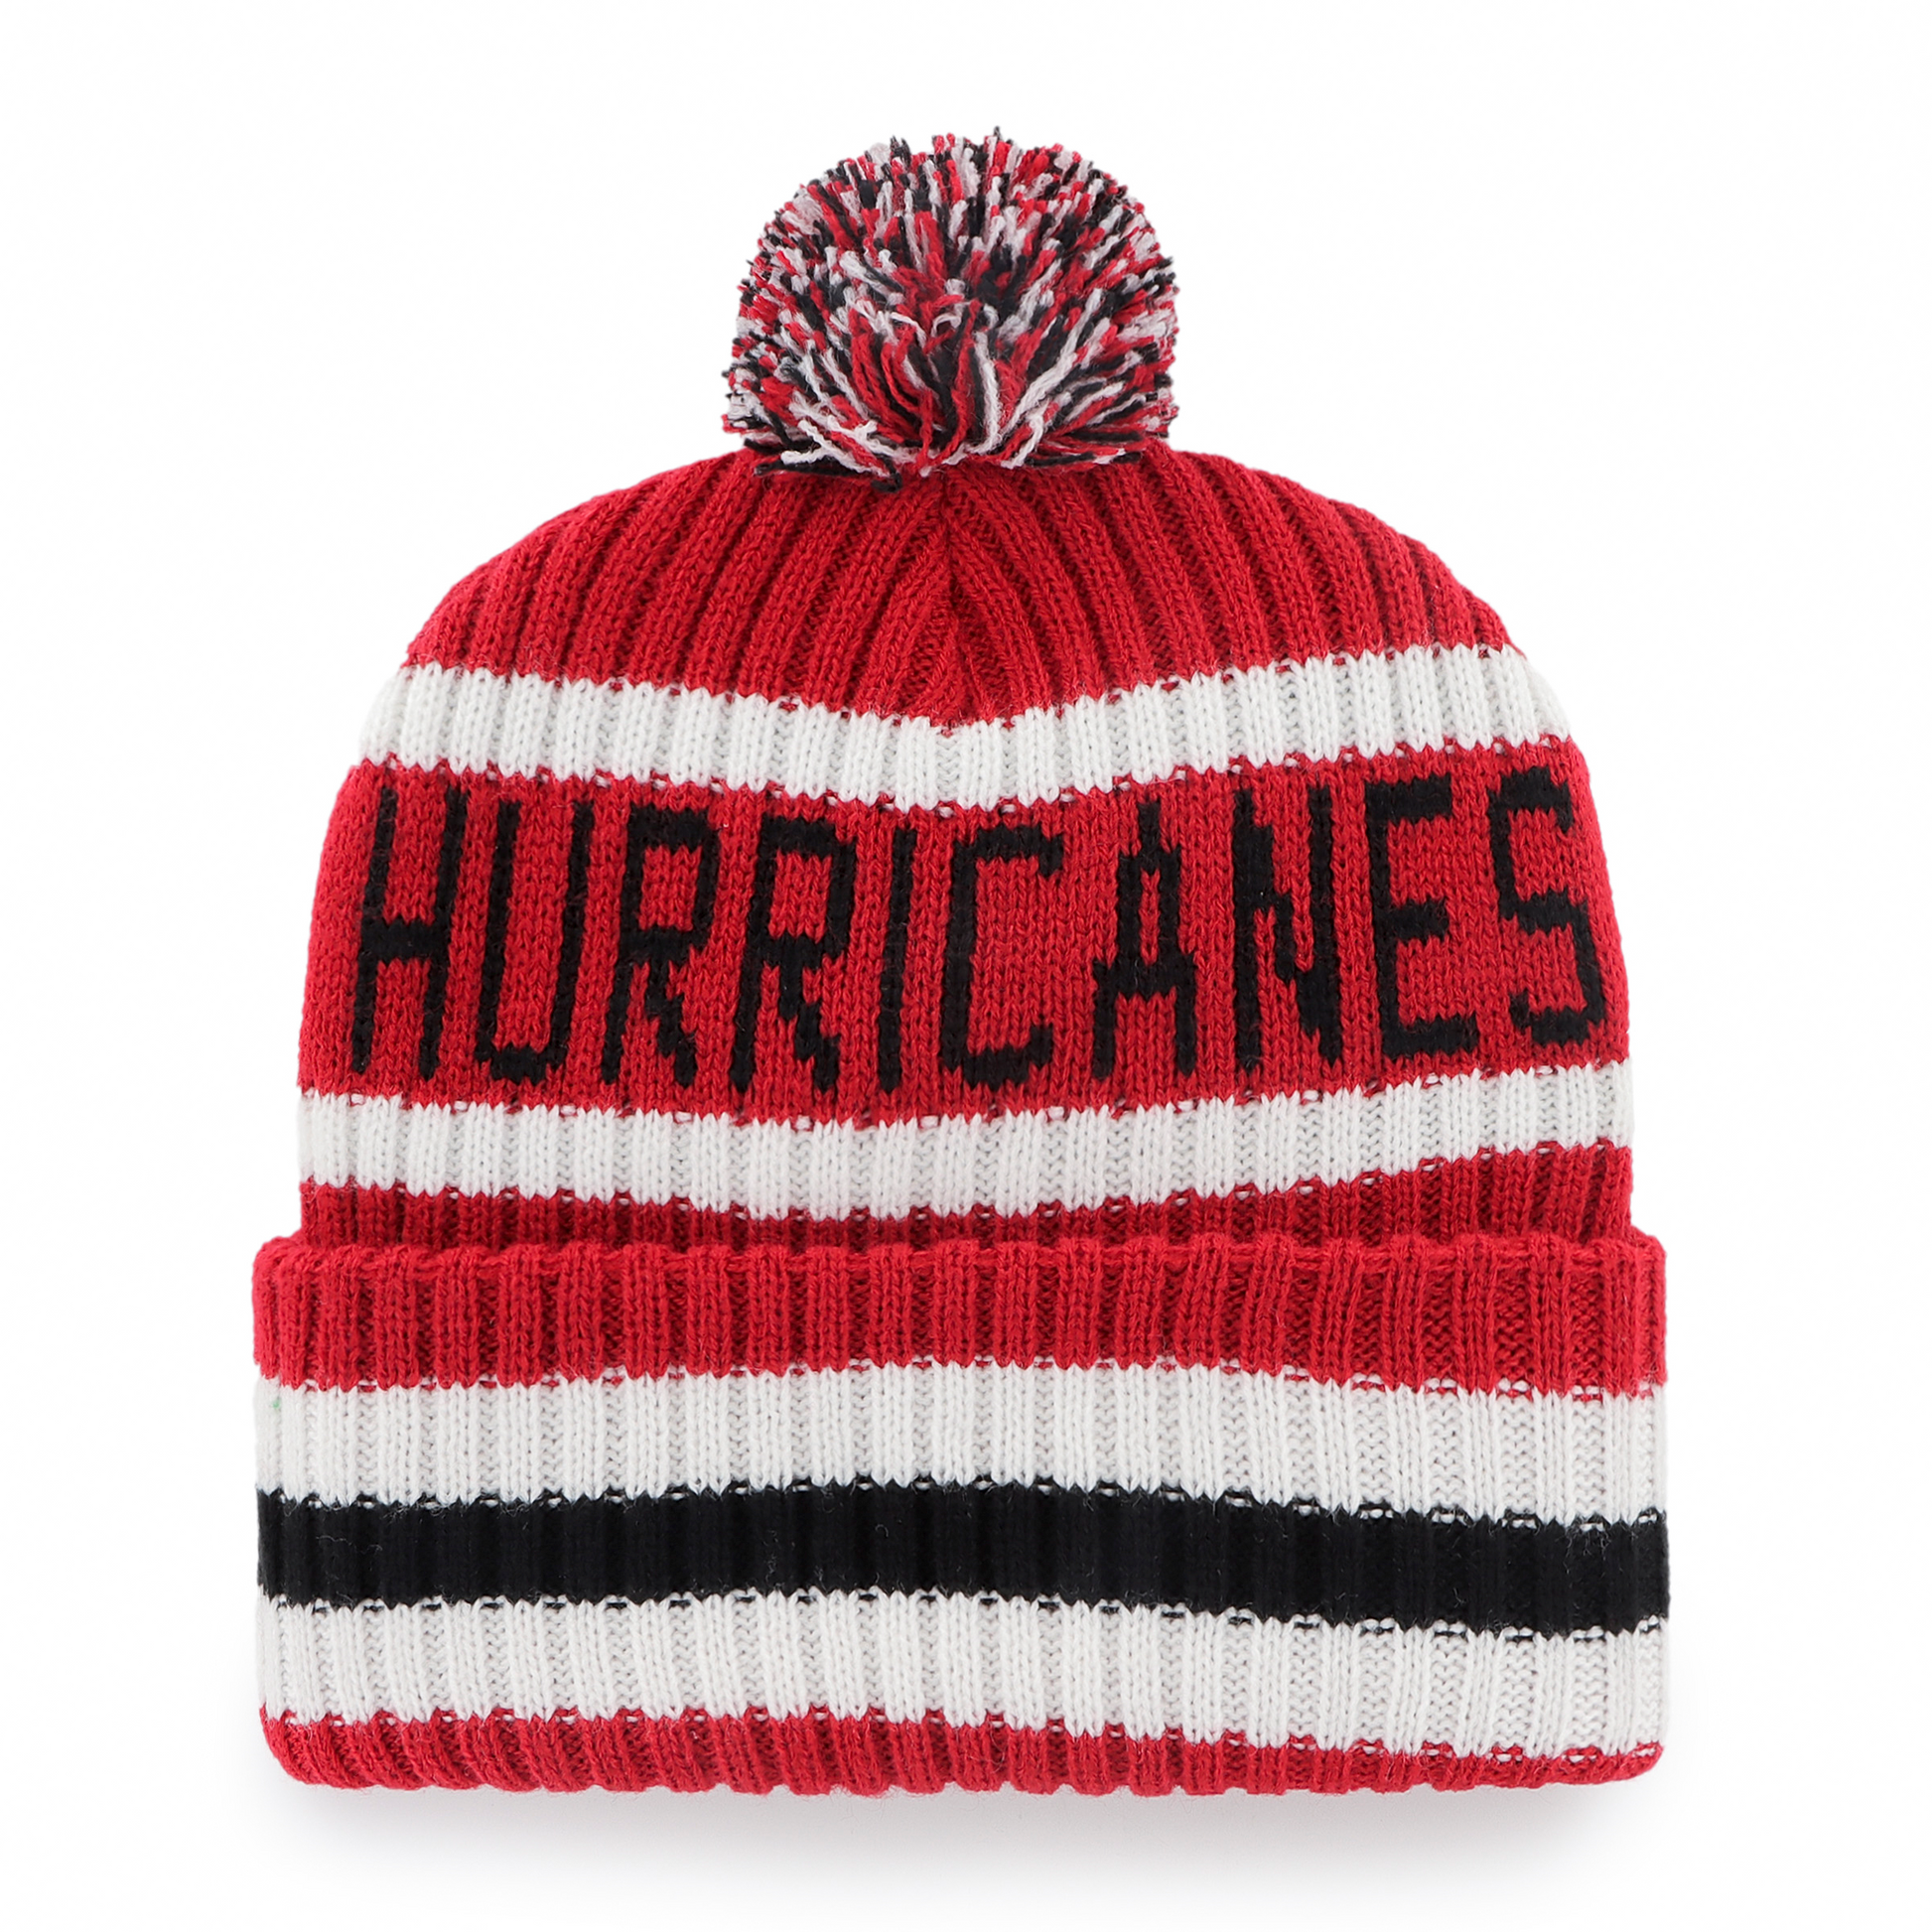 Back: Red white and black cuffed knit with pom, Hurricanes written in black on beanie